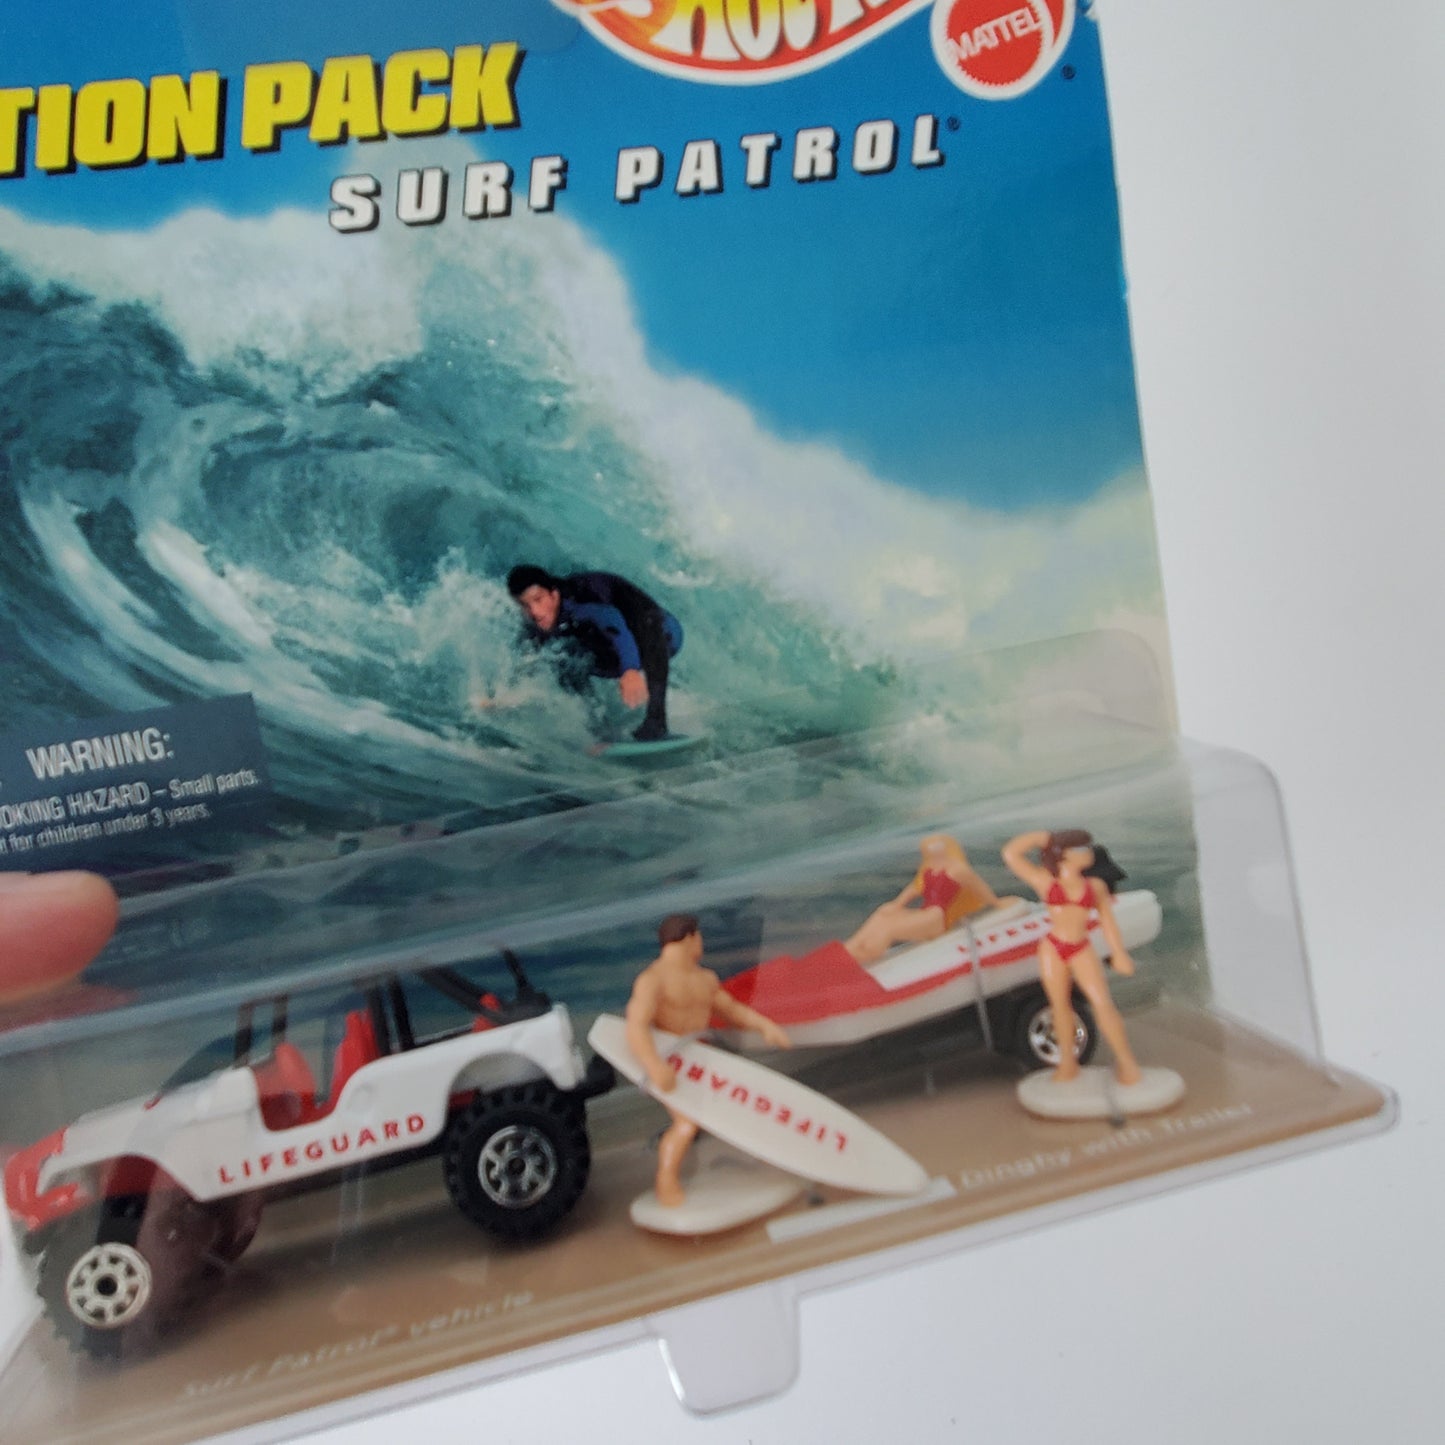 1996 Hot Wheels Action Pack Surf Patrol Jeep